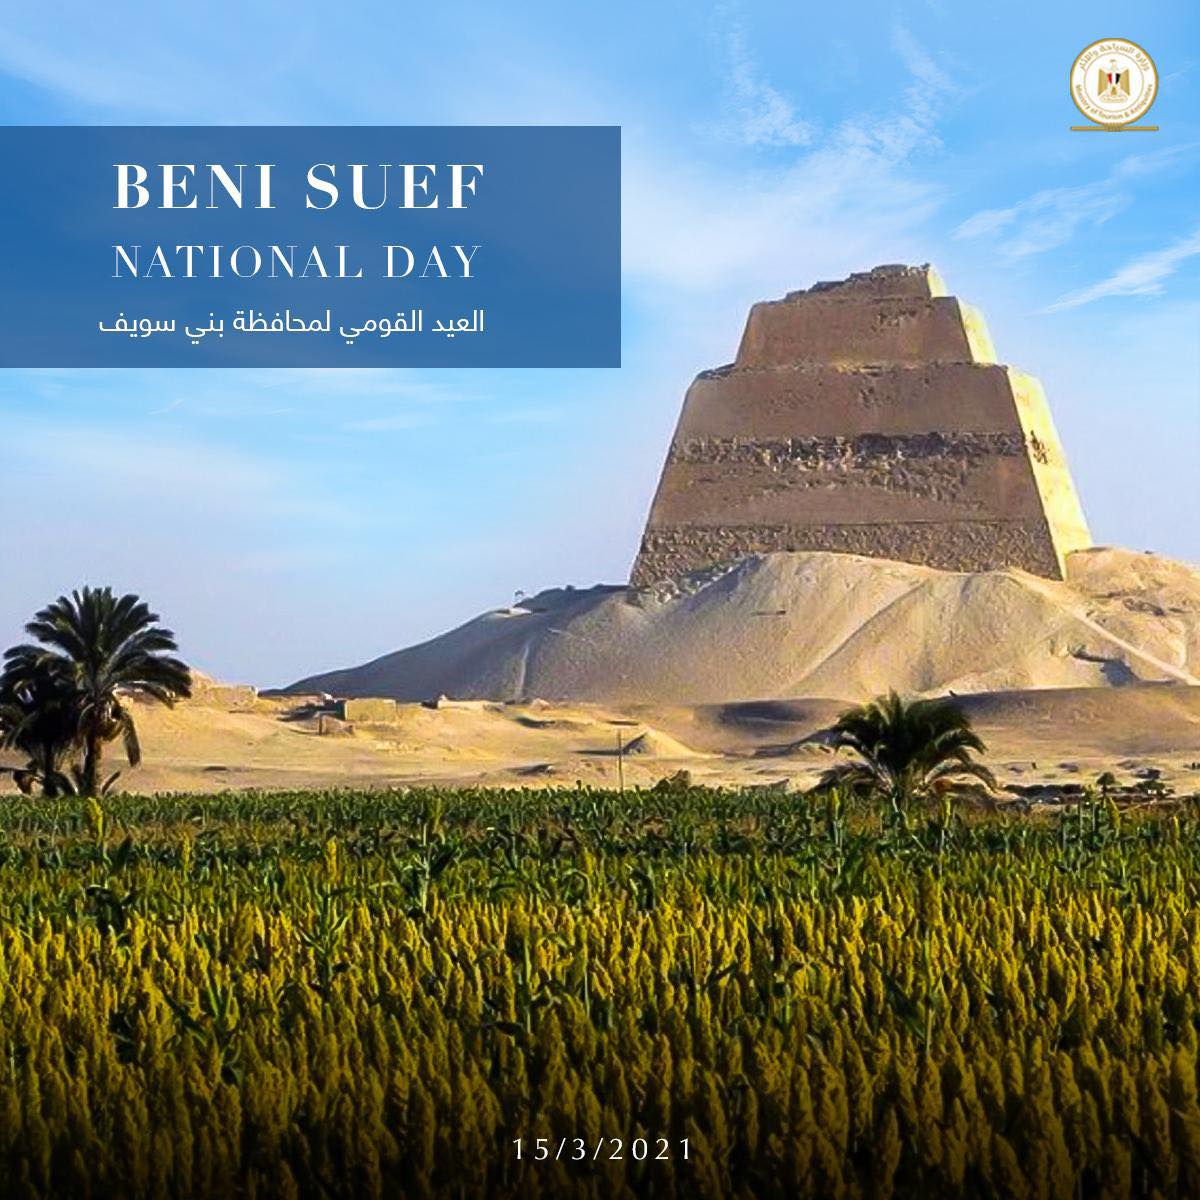 Beni Suef National Day - Min. of Tourism & Antiquities